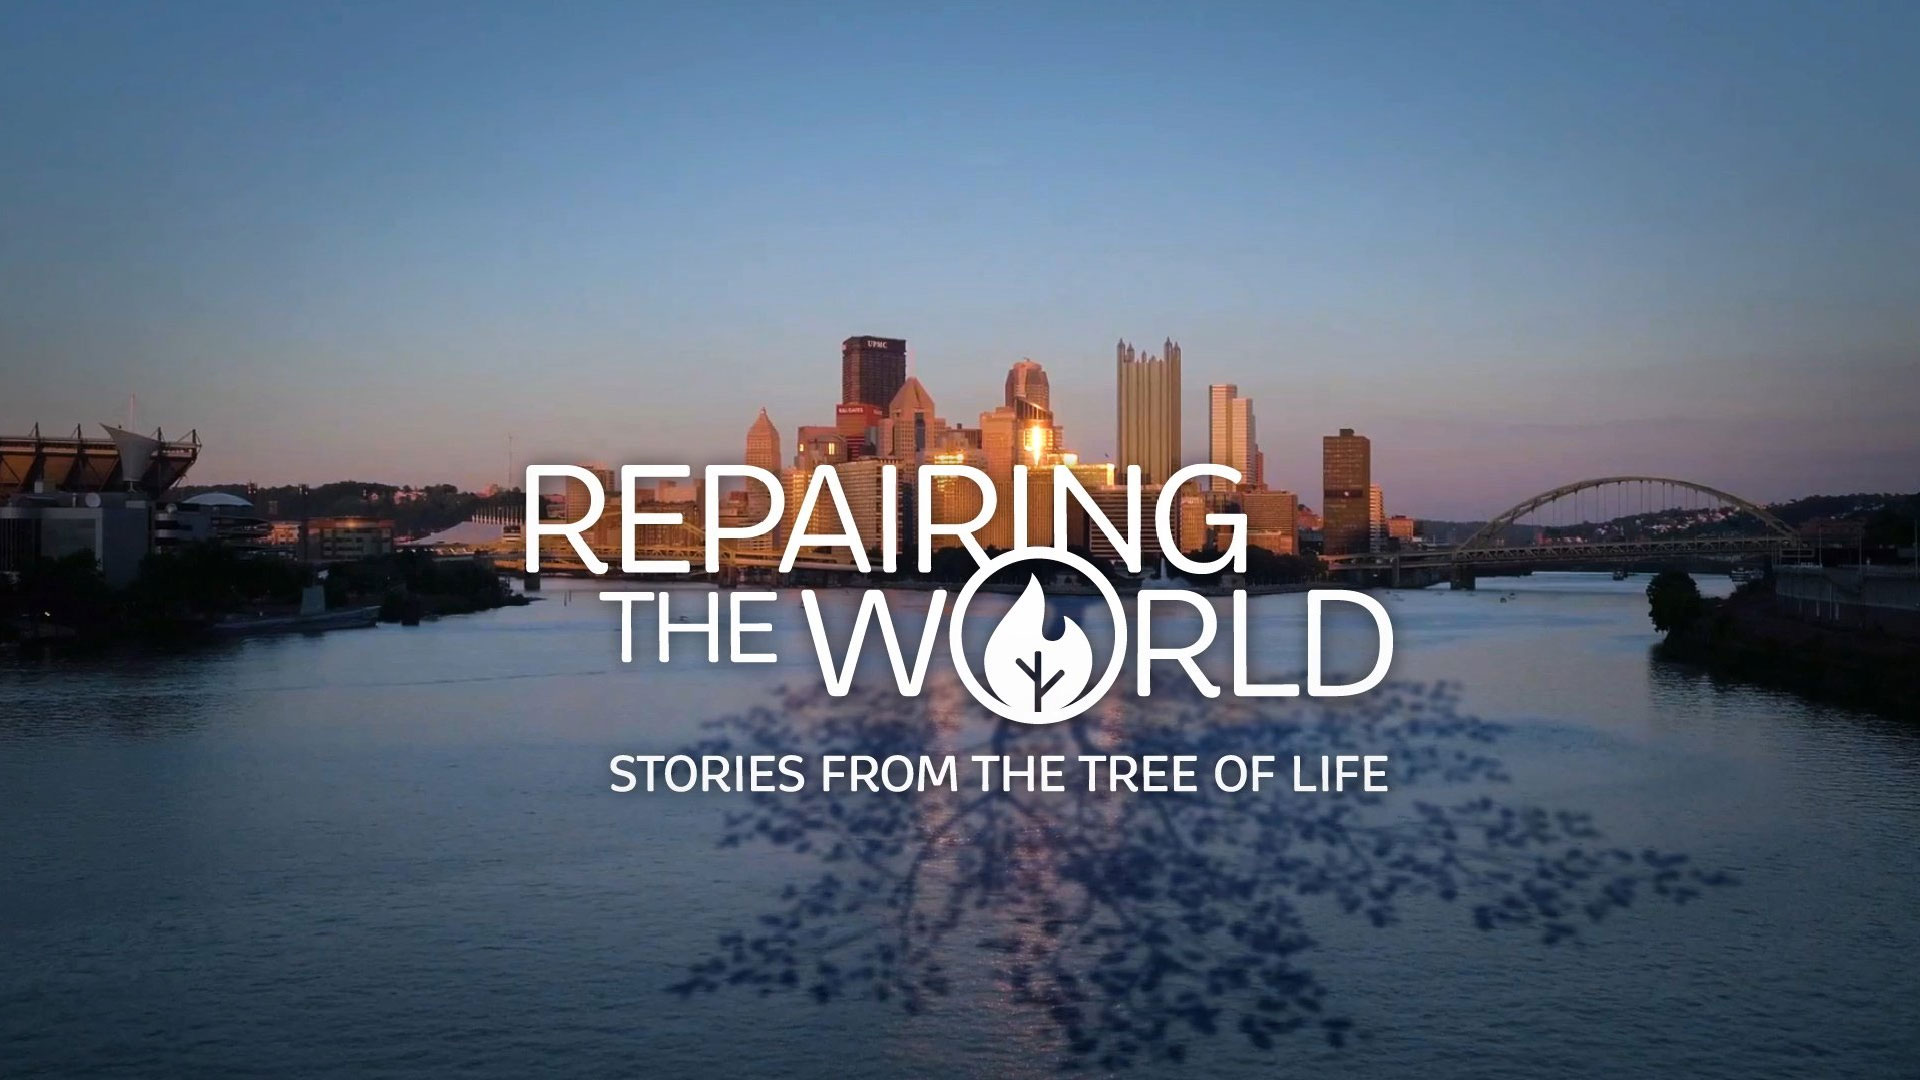 City building along a river at sunset with text overlay 'Repairing the World, Stories from the Tree of Life'.